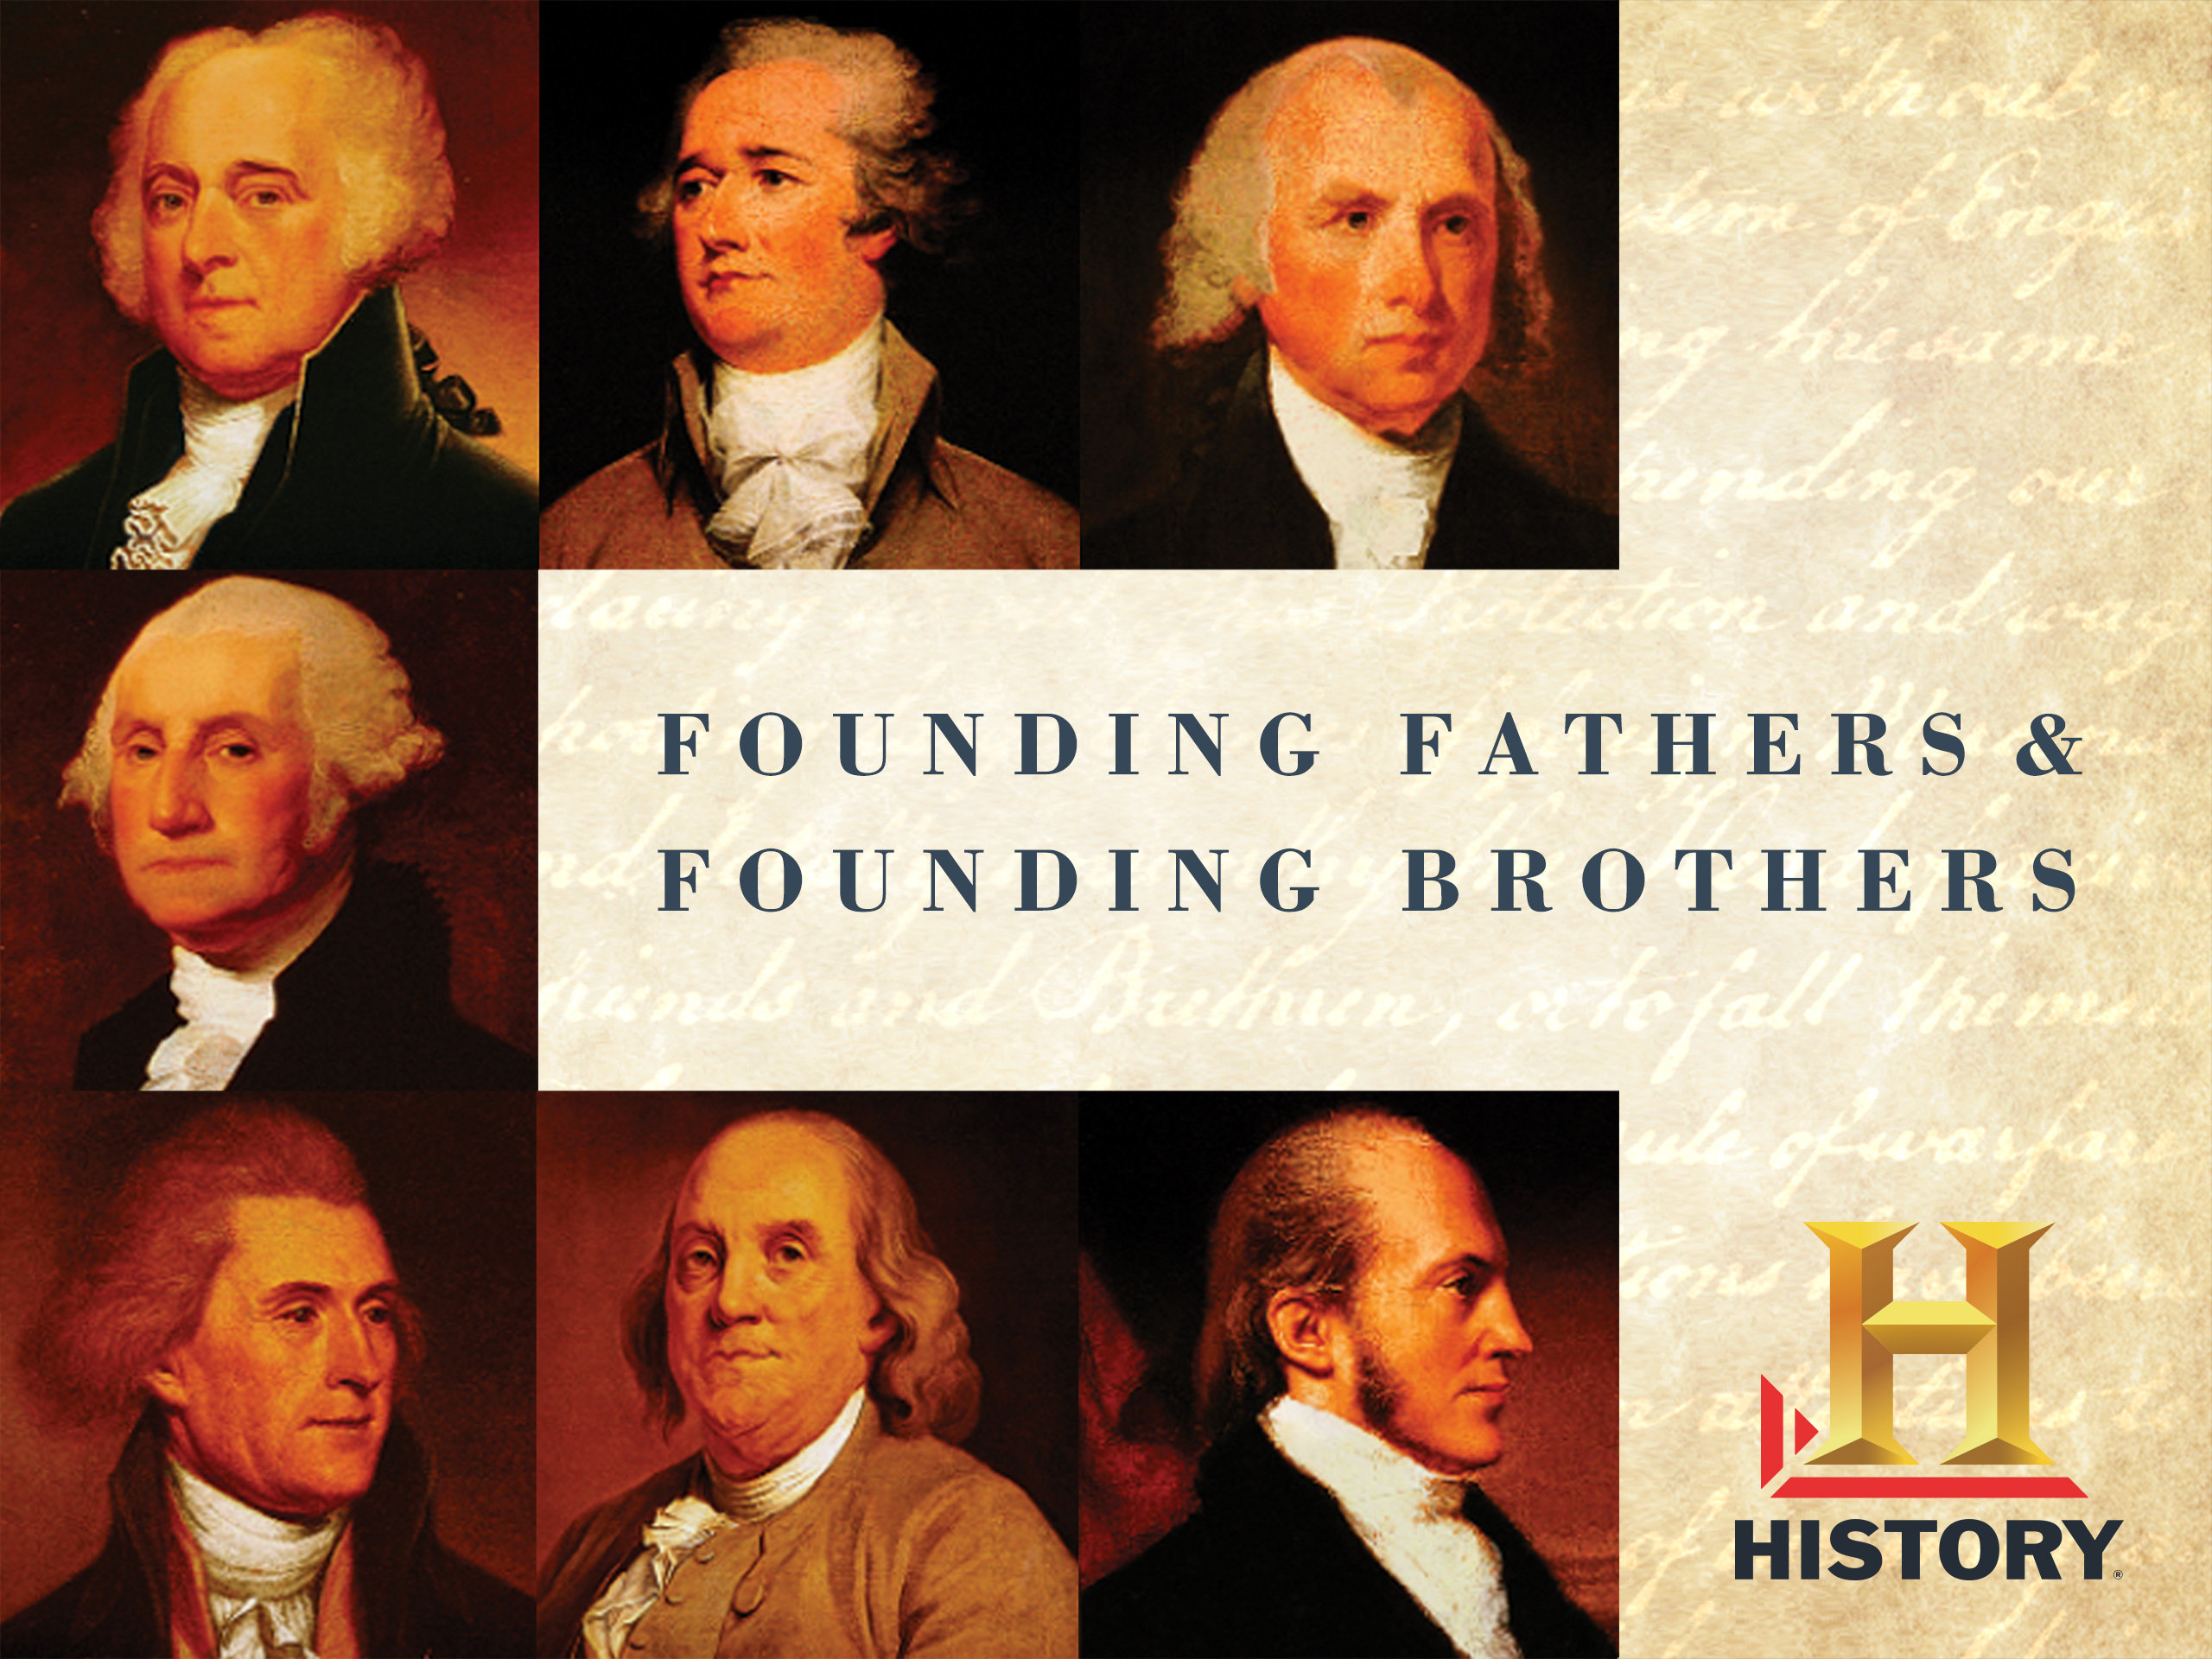 Founding Brothers: Six Key Moments in American History